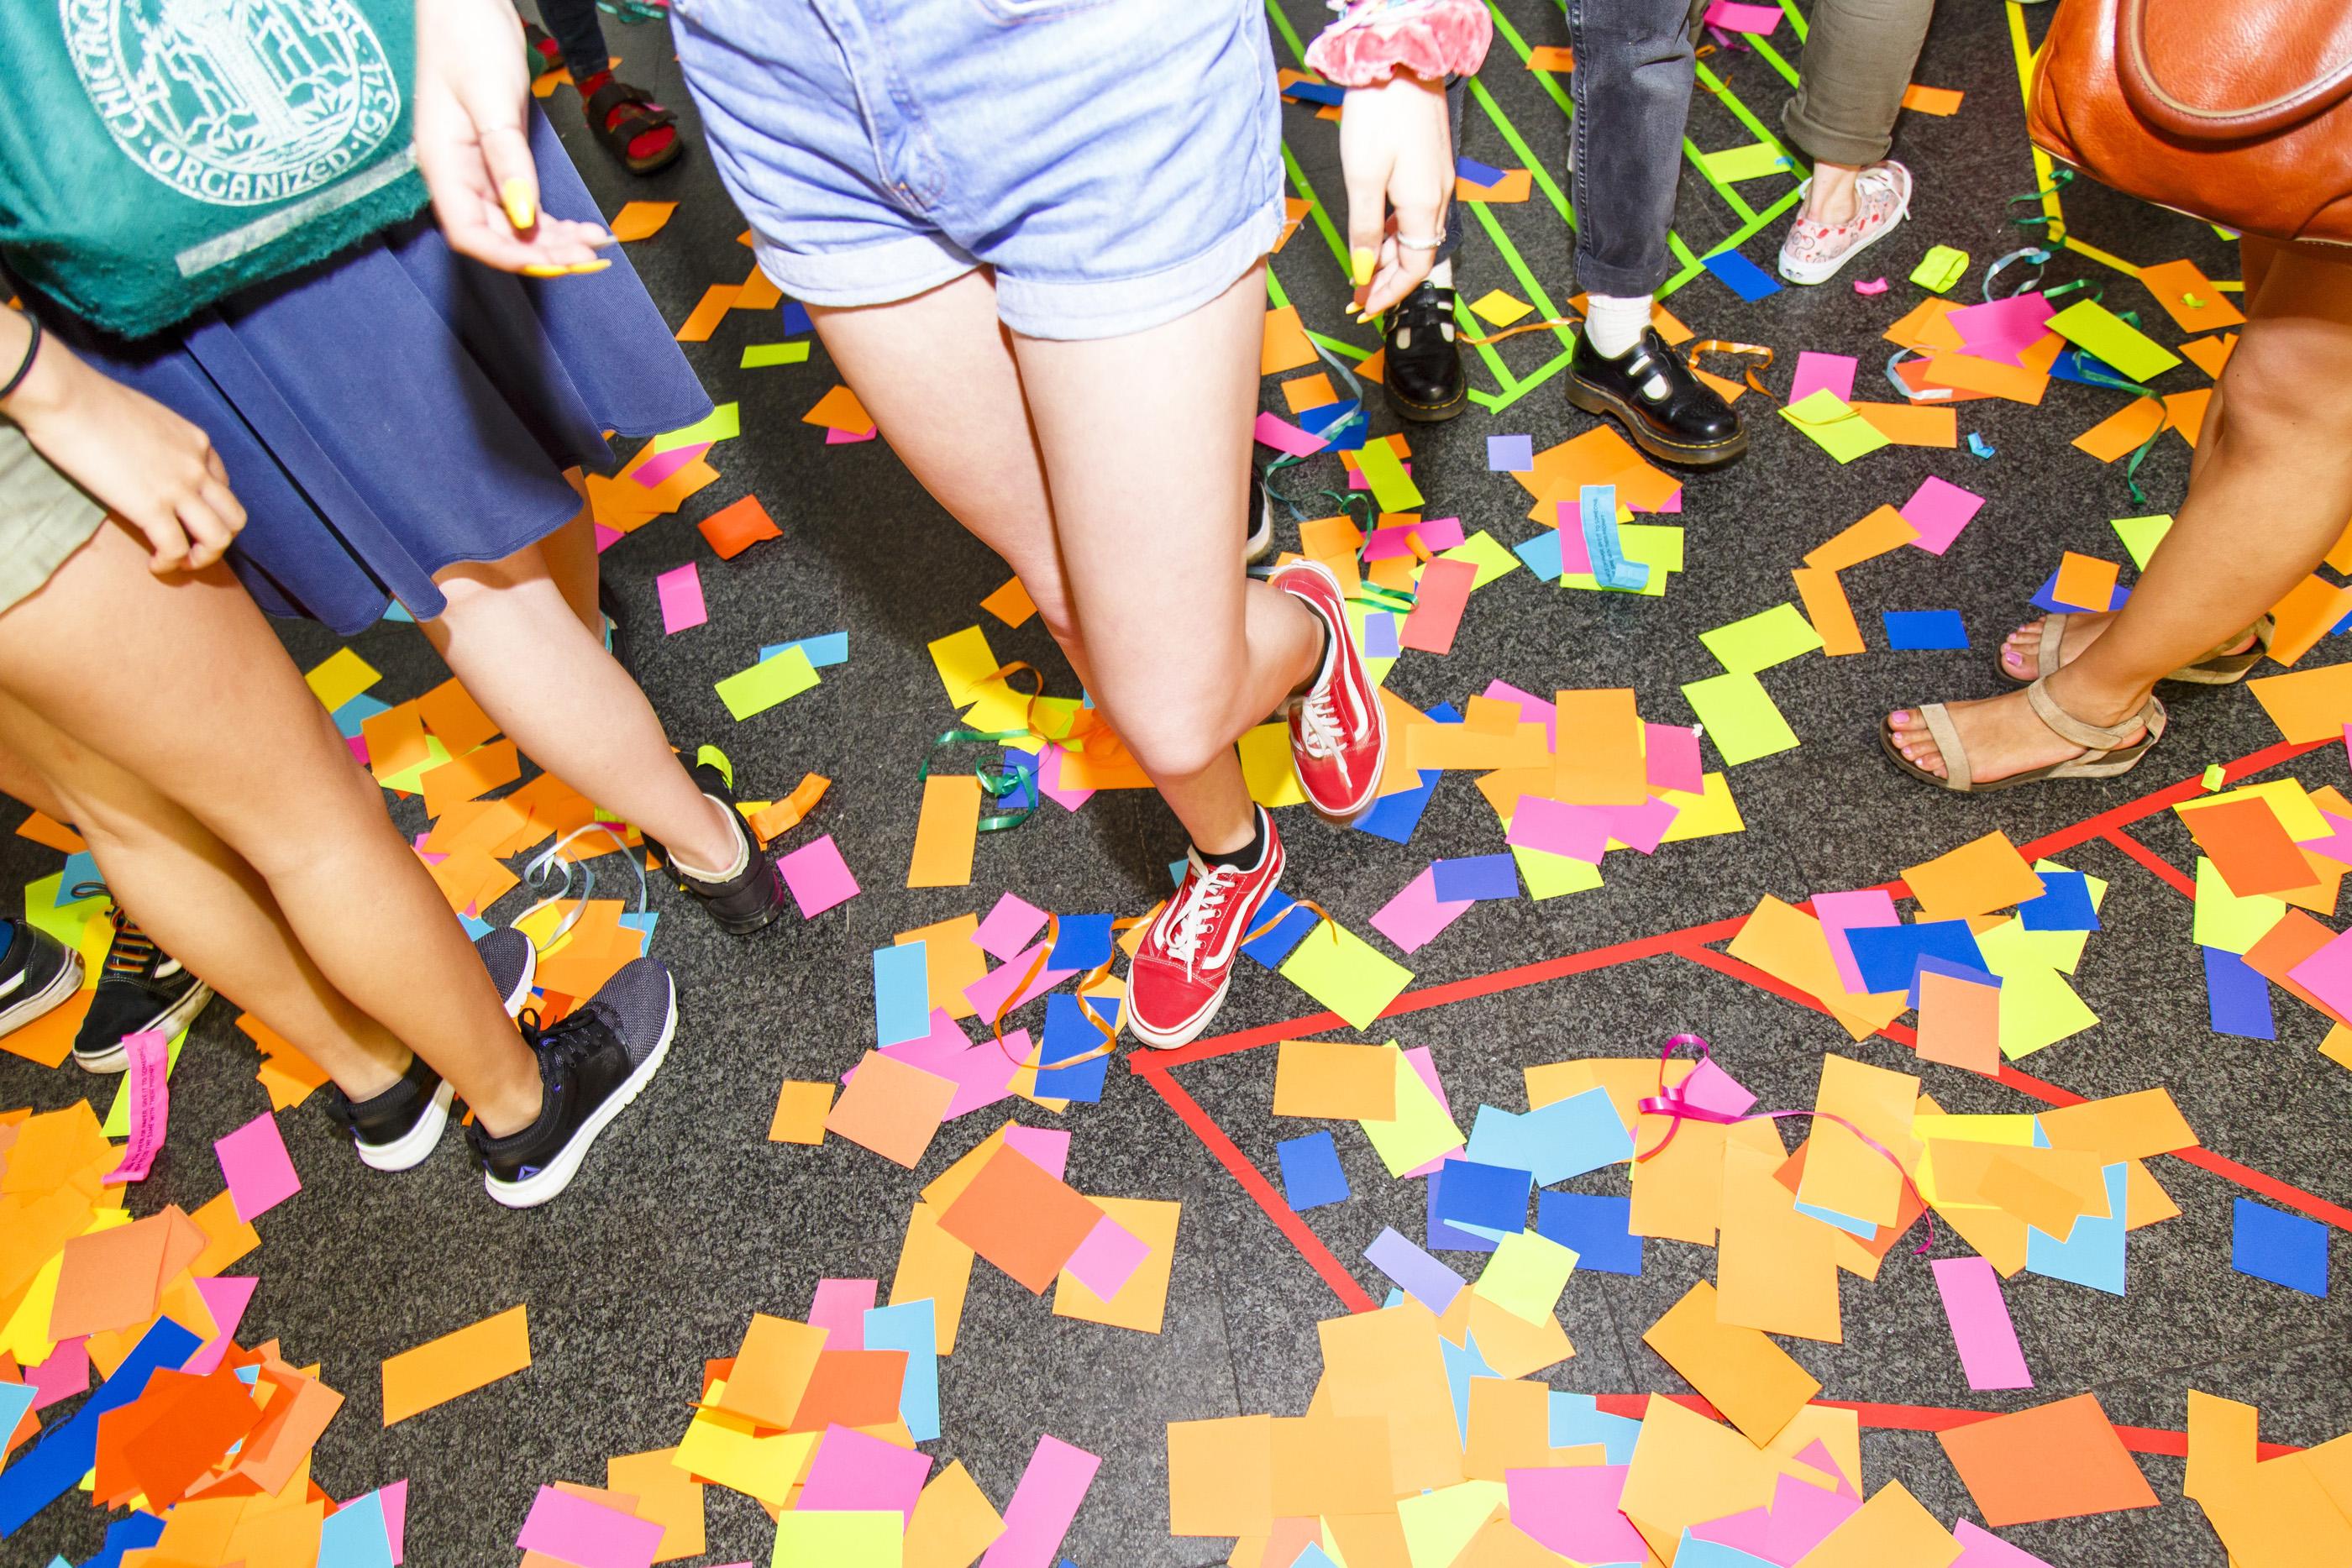 view of floor covered in brightly covered confetti